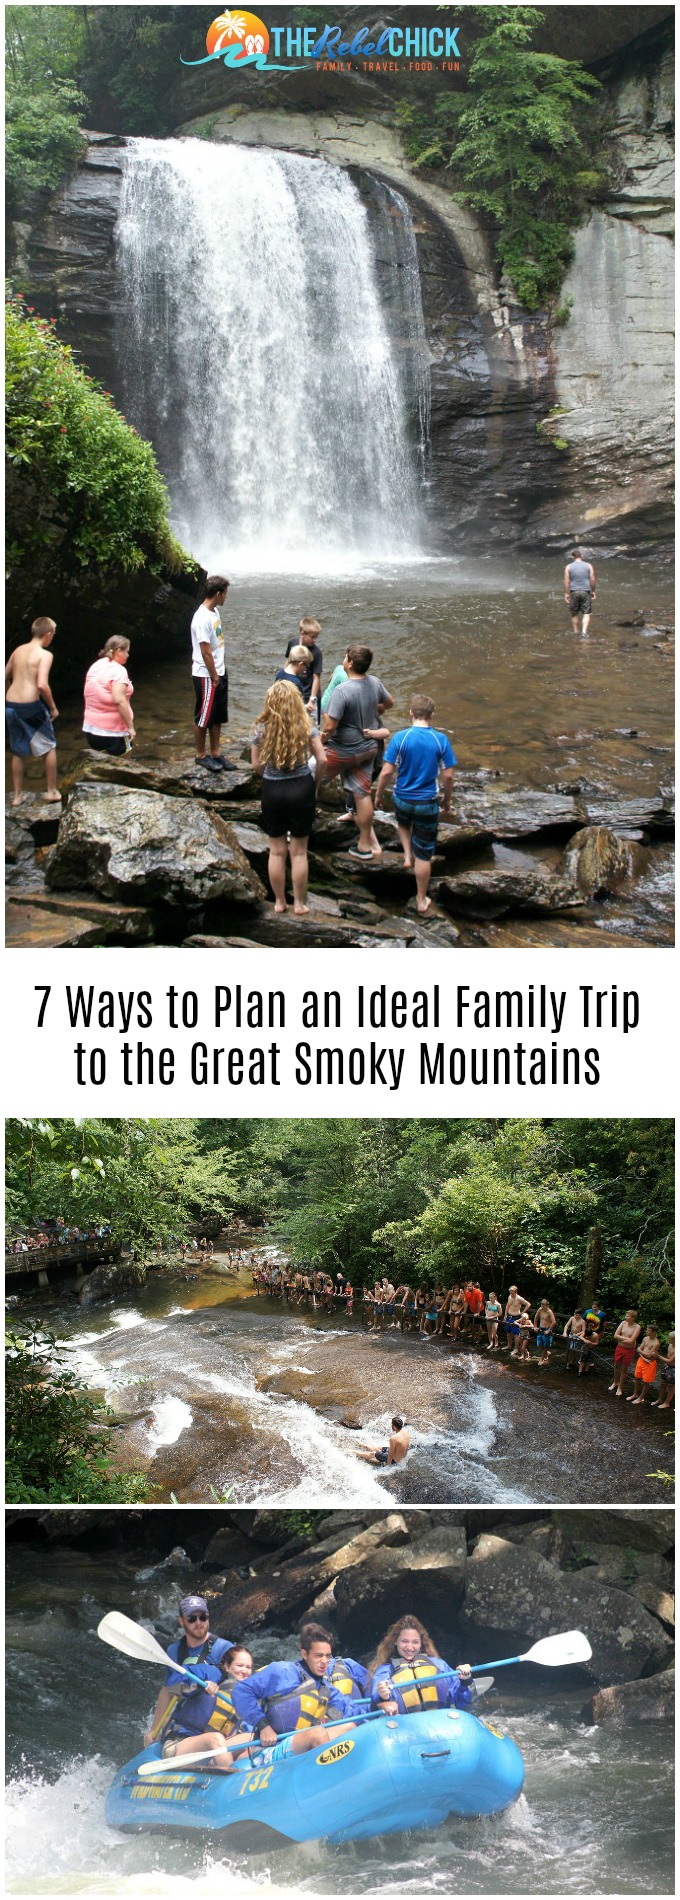 7 Ways to Plan an Ideal Family Trip to the Great Smoky Mountains